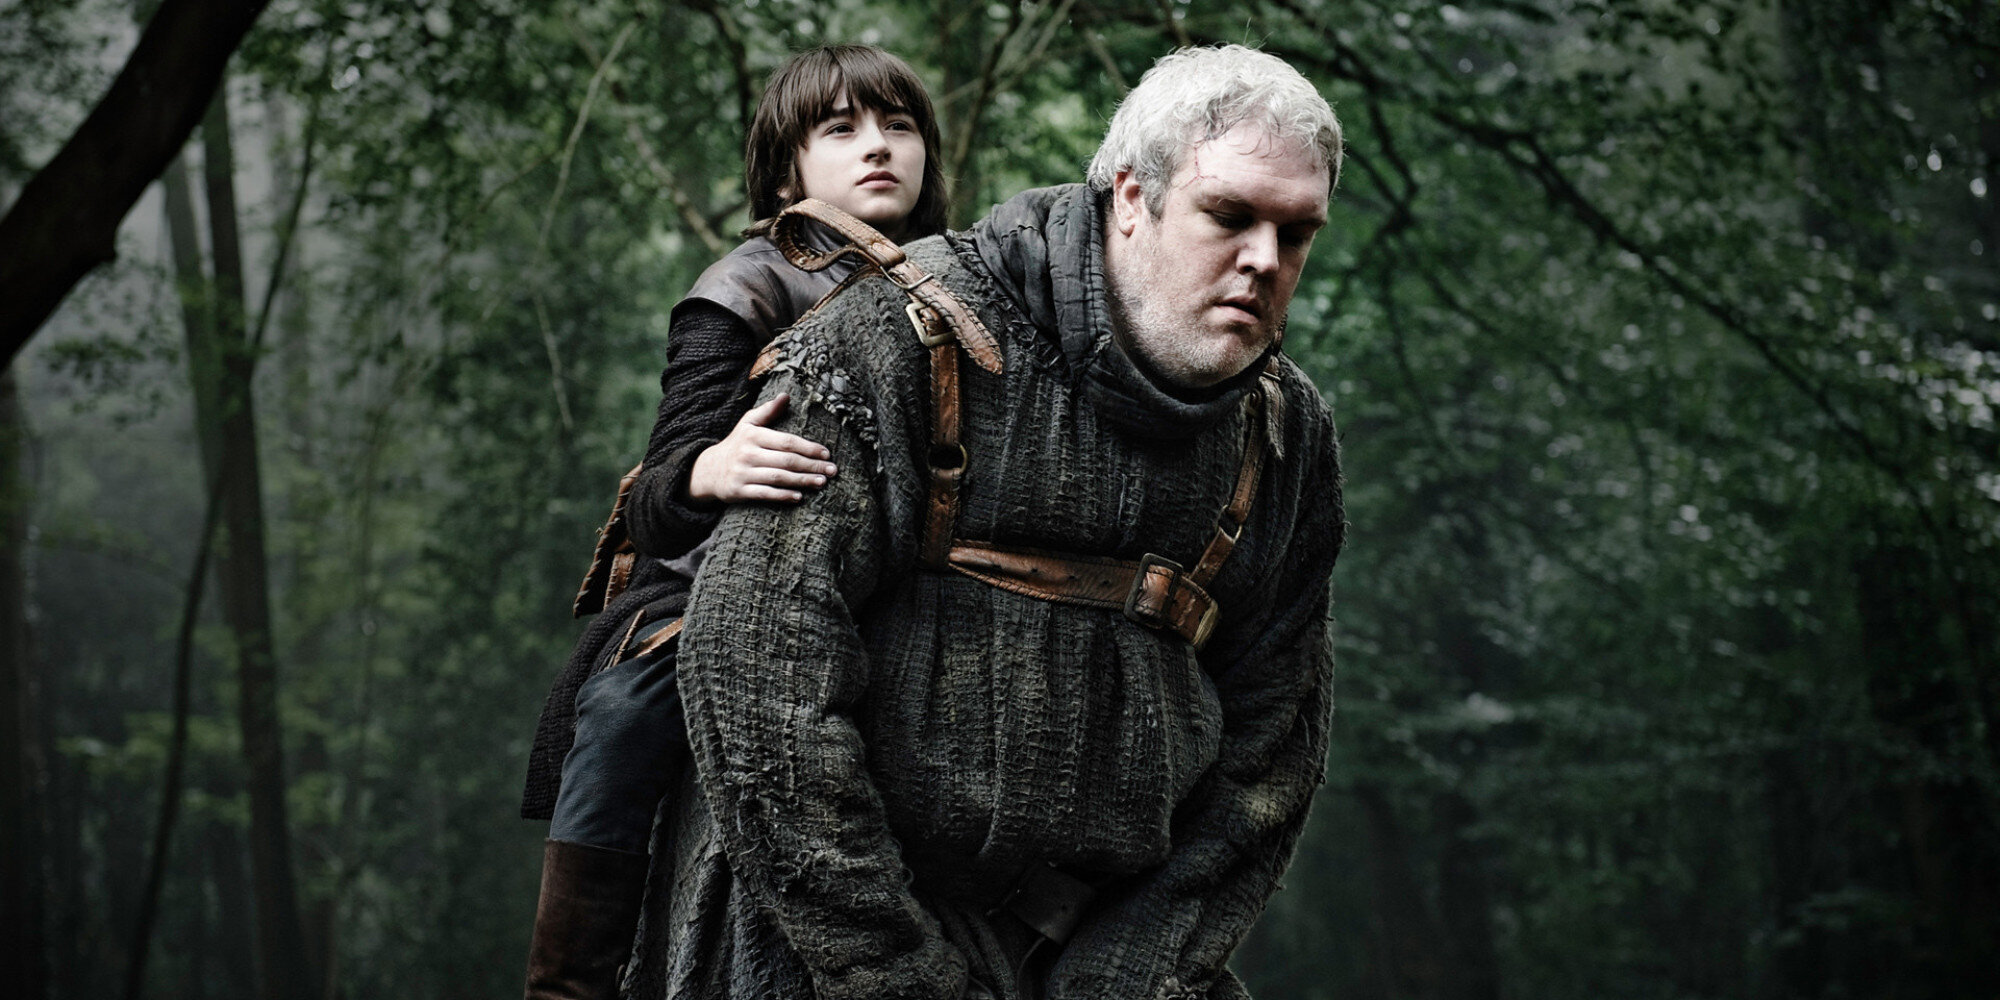 April 12, 2015, Turin, Turin, Italy: Kristian Nairn, Kristian Nairn, known  to international audiences for playing the character Hodor in the famous  series Game of Thrones is available to fans for a meet&greet. (Credit  Image: © Daniela Parra Saiani/Pacific Press ...